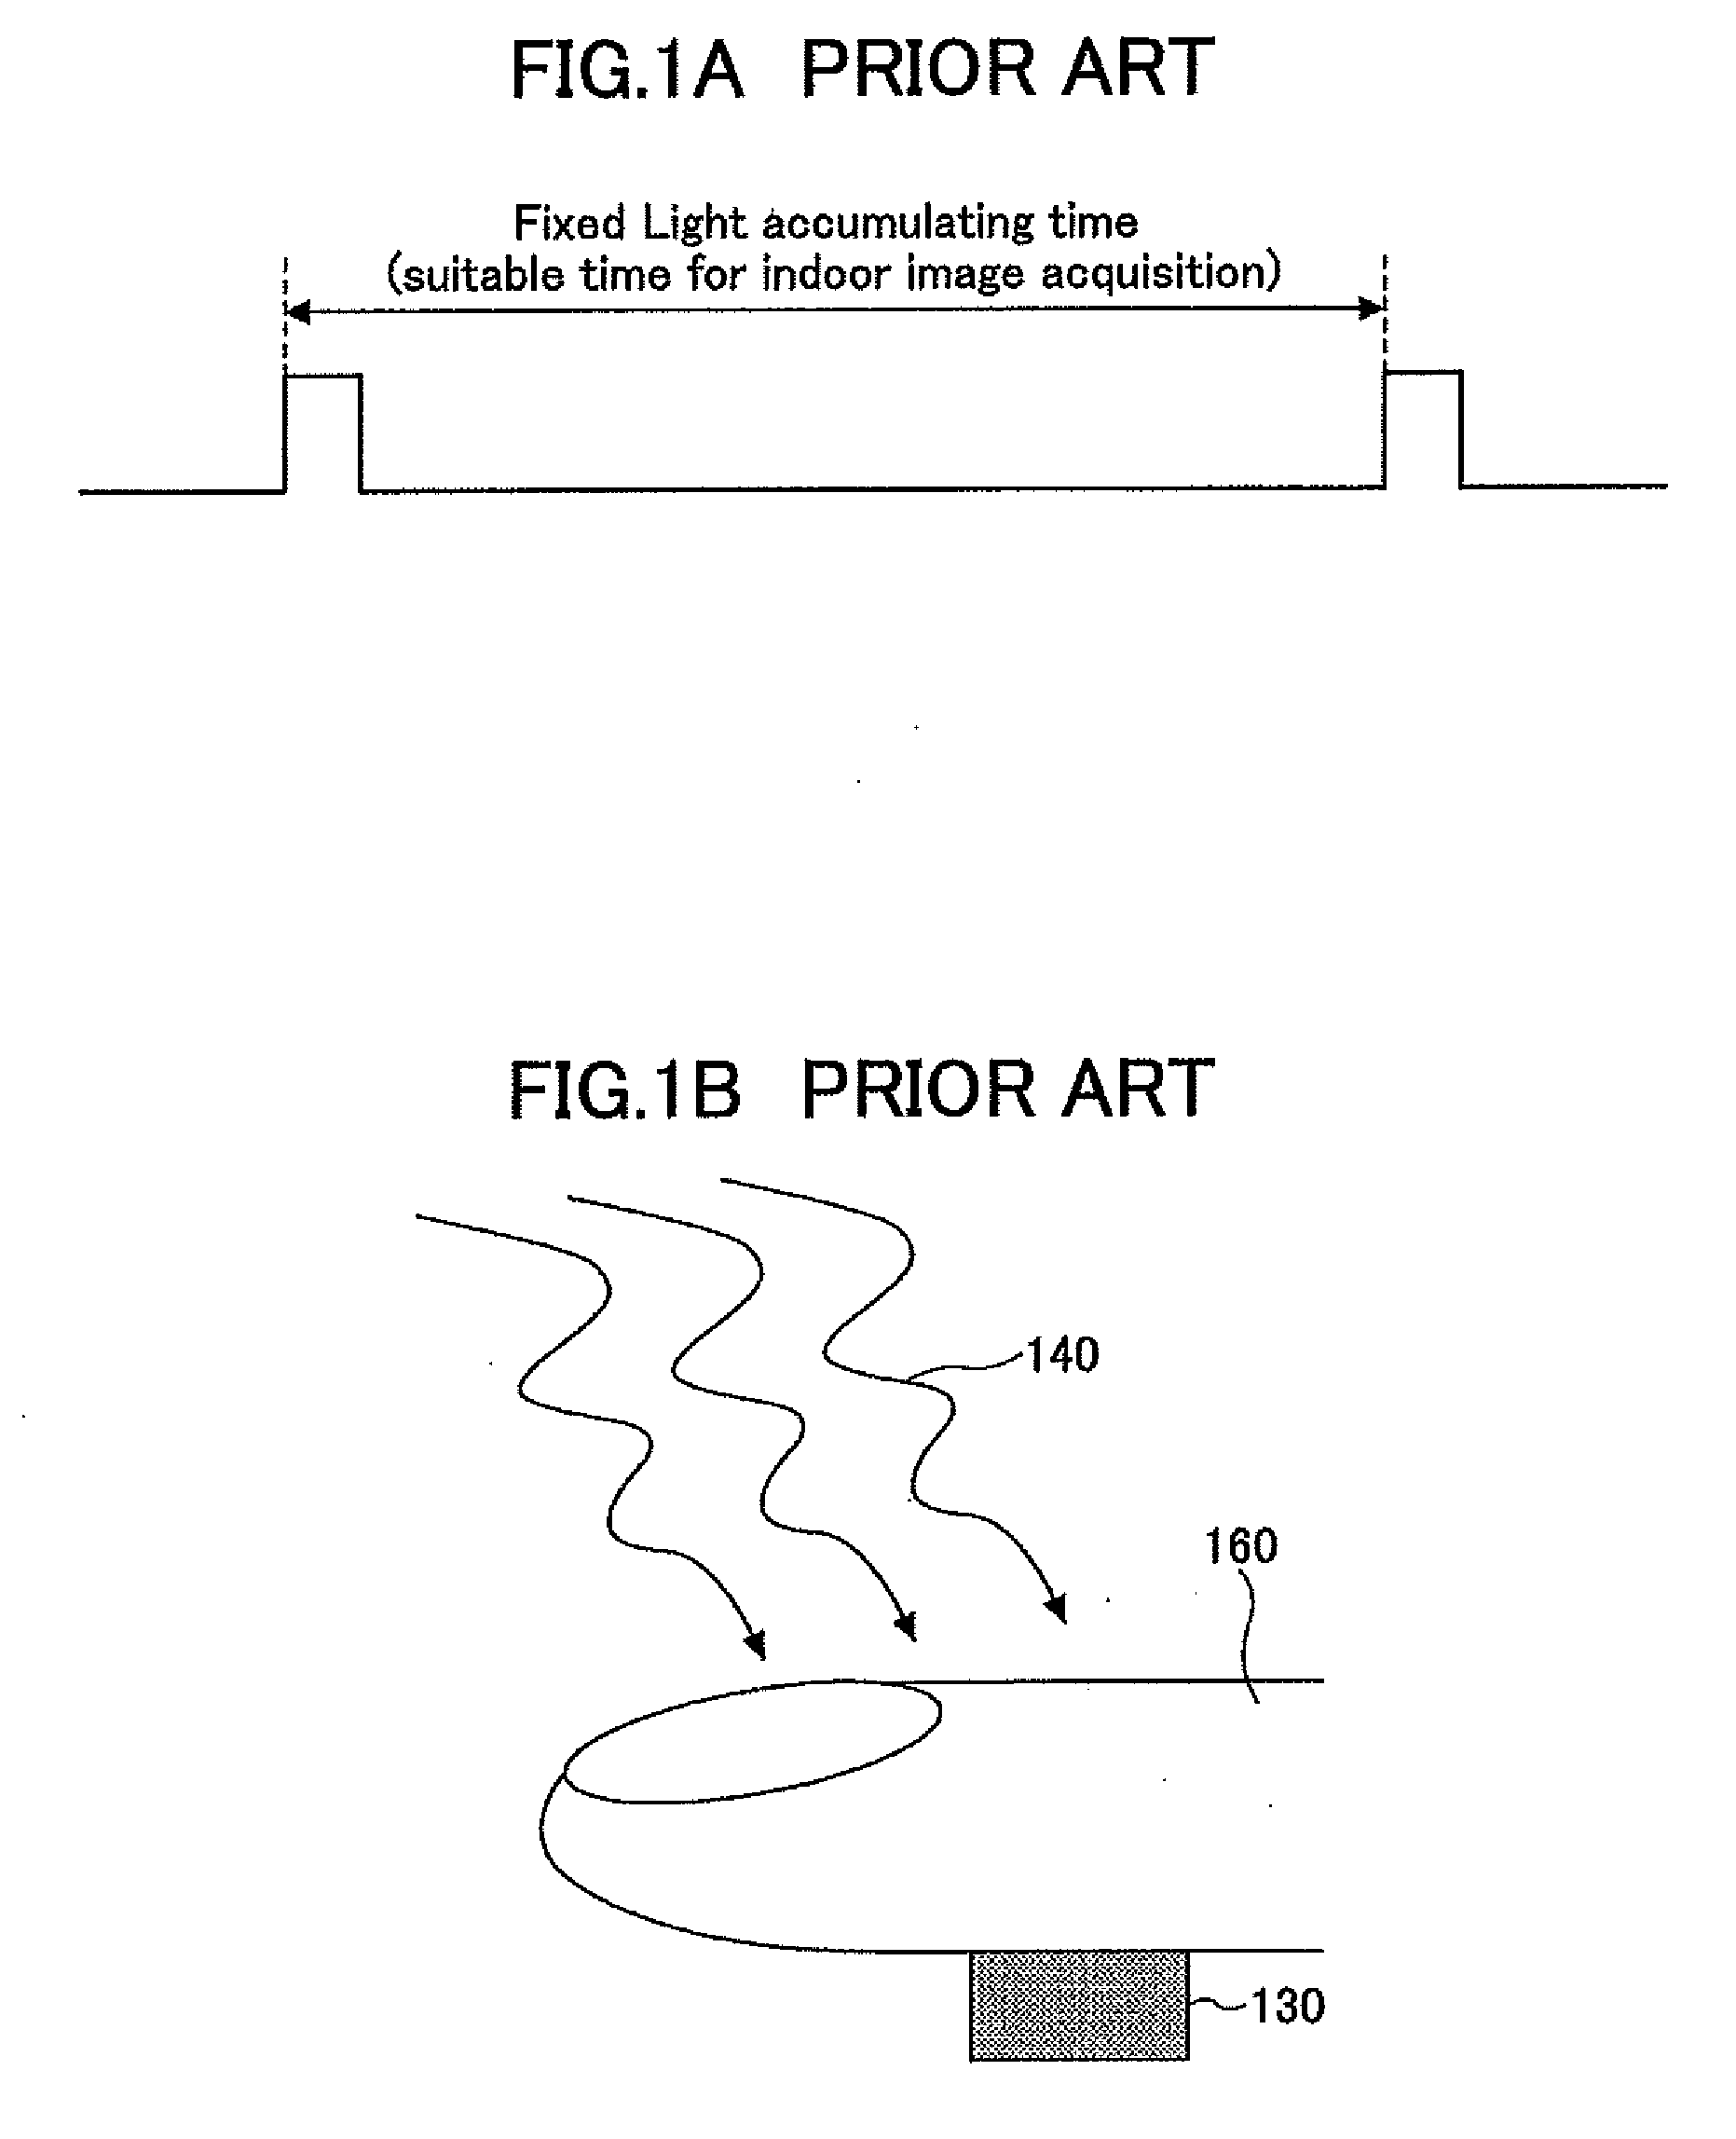 Image Reading Apparatus and Image Reading Method